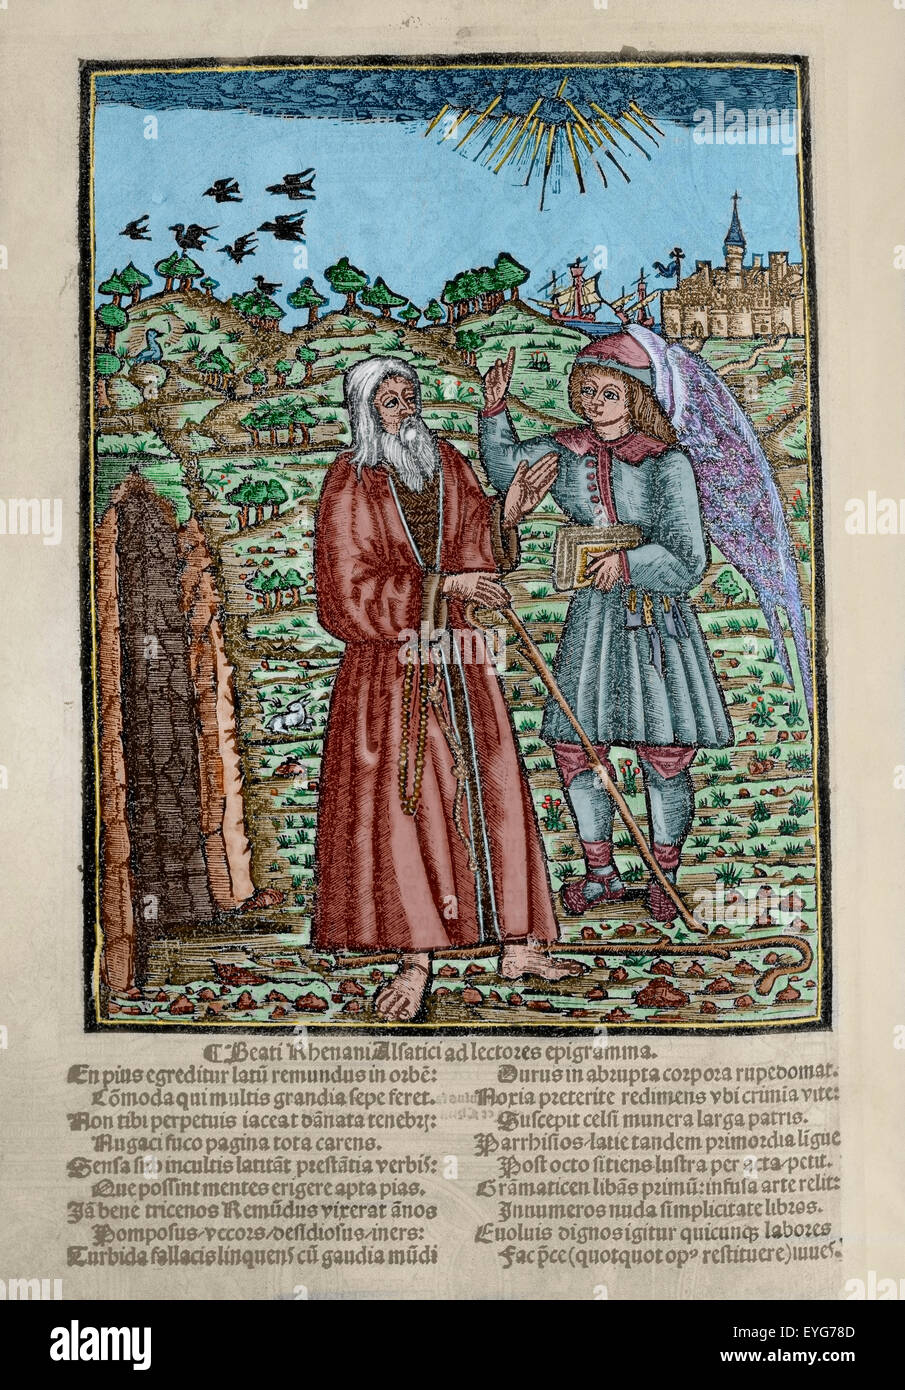 Ramon Llull (1235-1316). Spanish writer and philosopher. Blanquerna, ca. 1293. Engraving of the back cover with Llull and a disciple. Beati Rhenani Alfatici ad lectores epigramma. Folio in Latin. Colored. Stock Photo